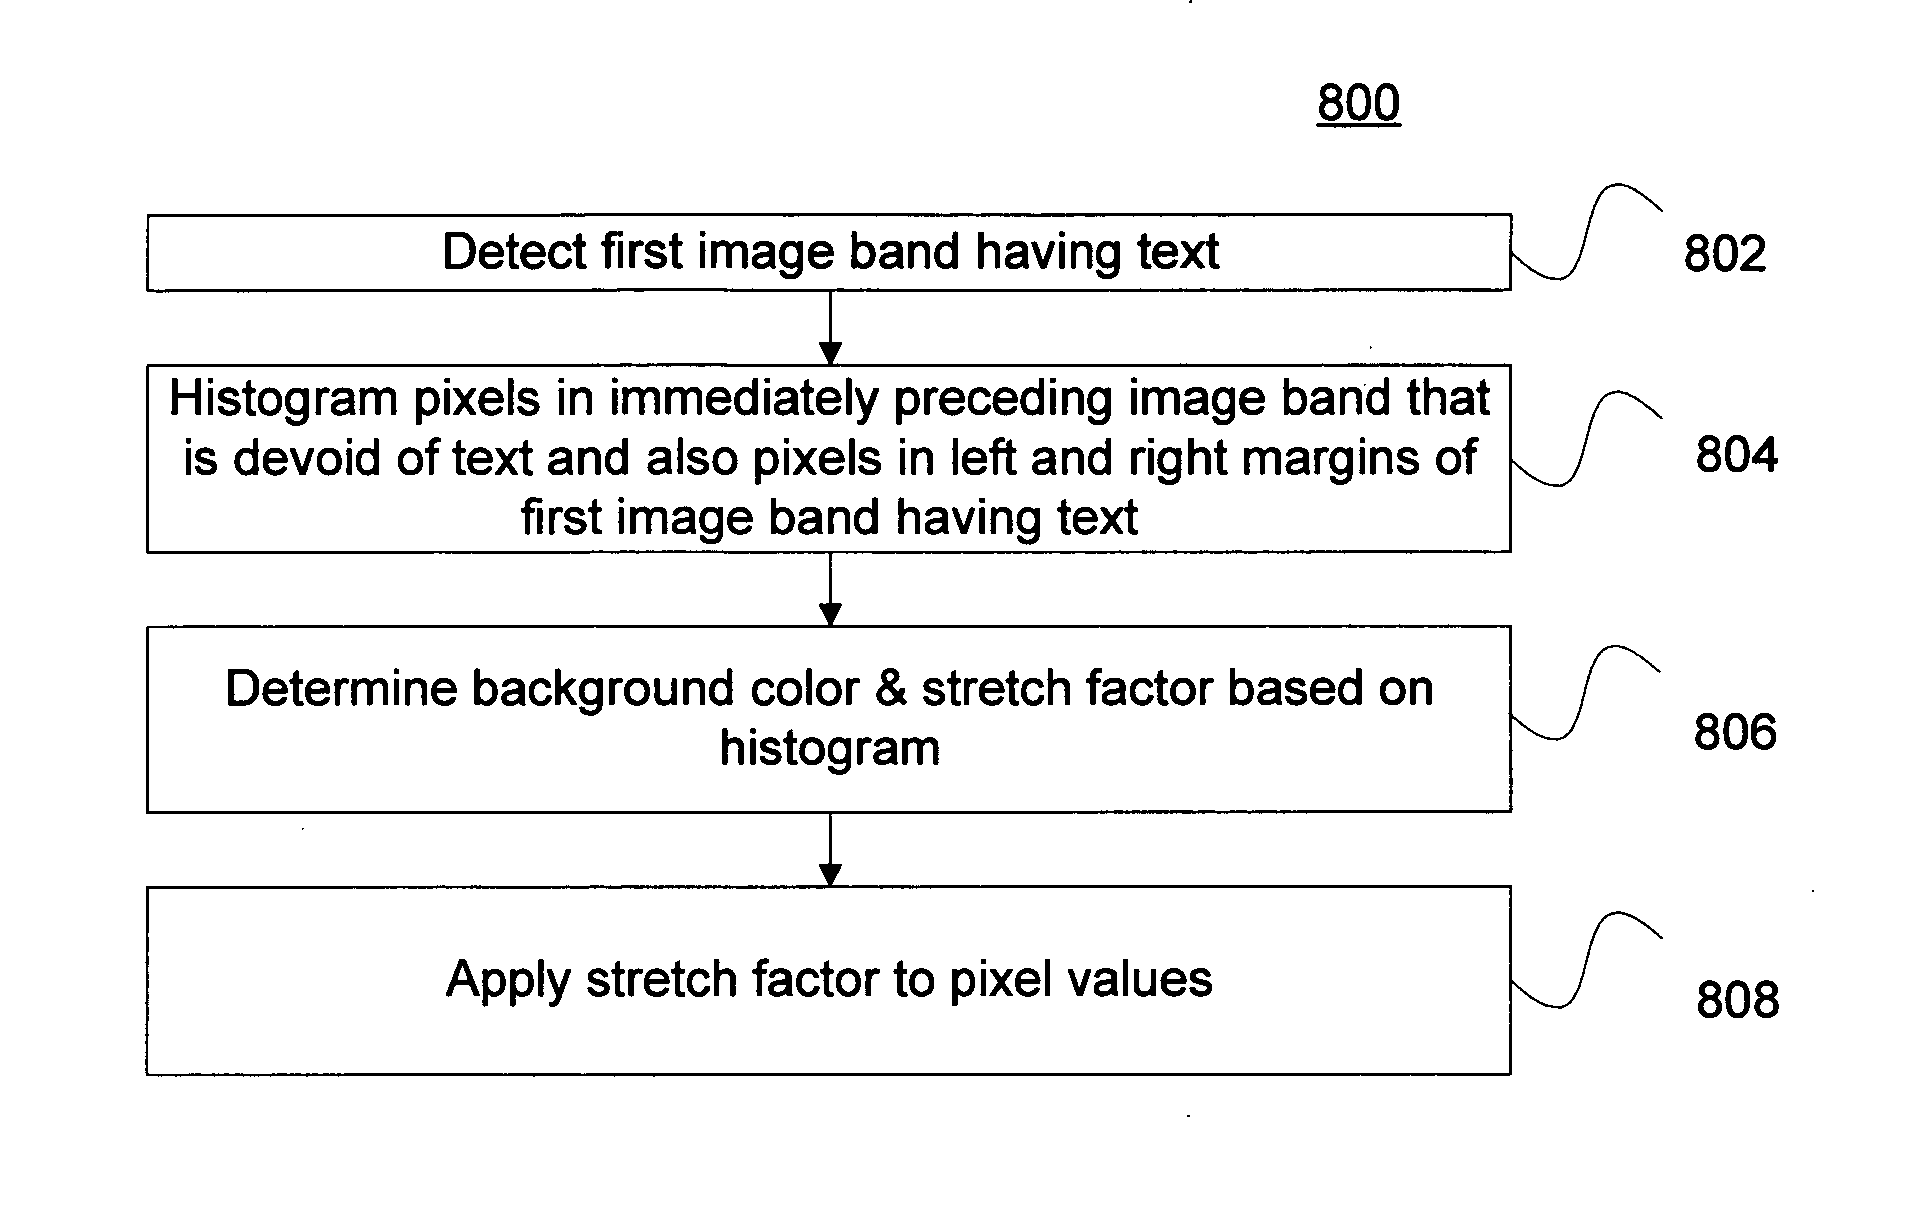 Method for image background detection and removal